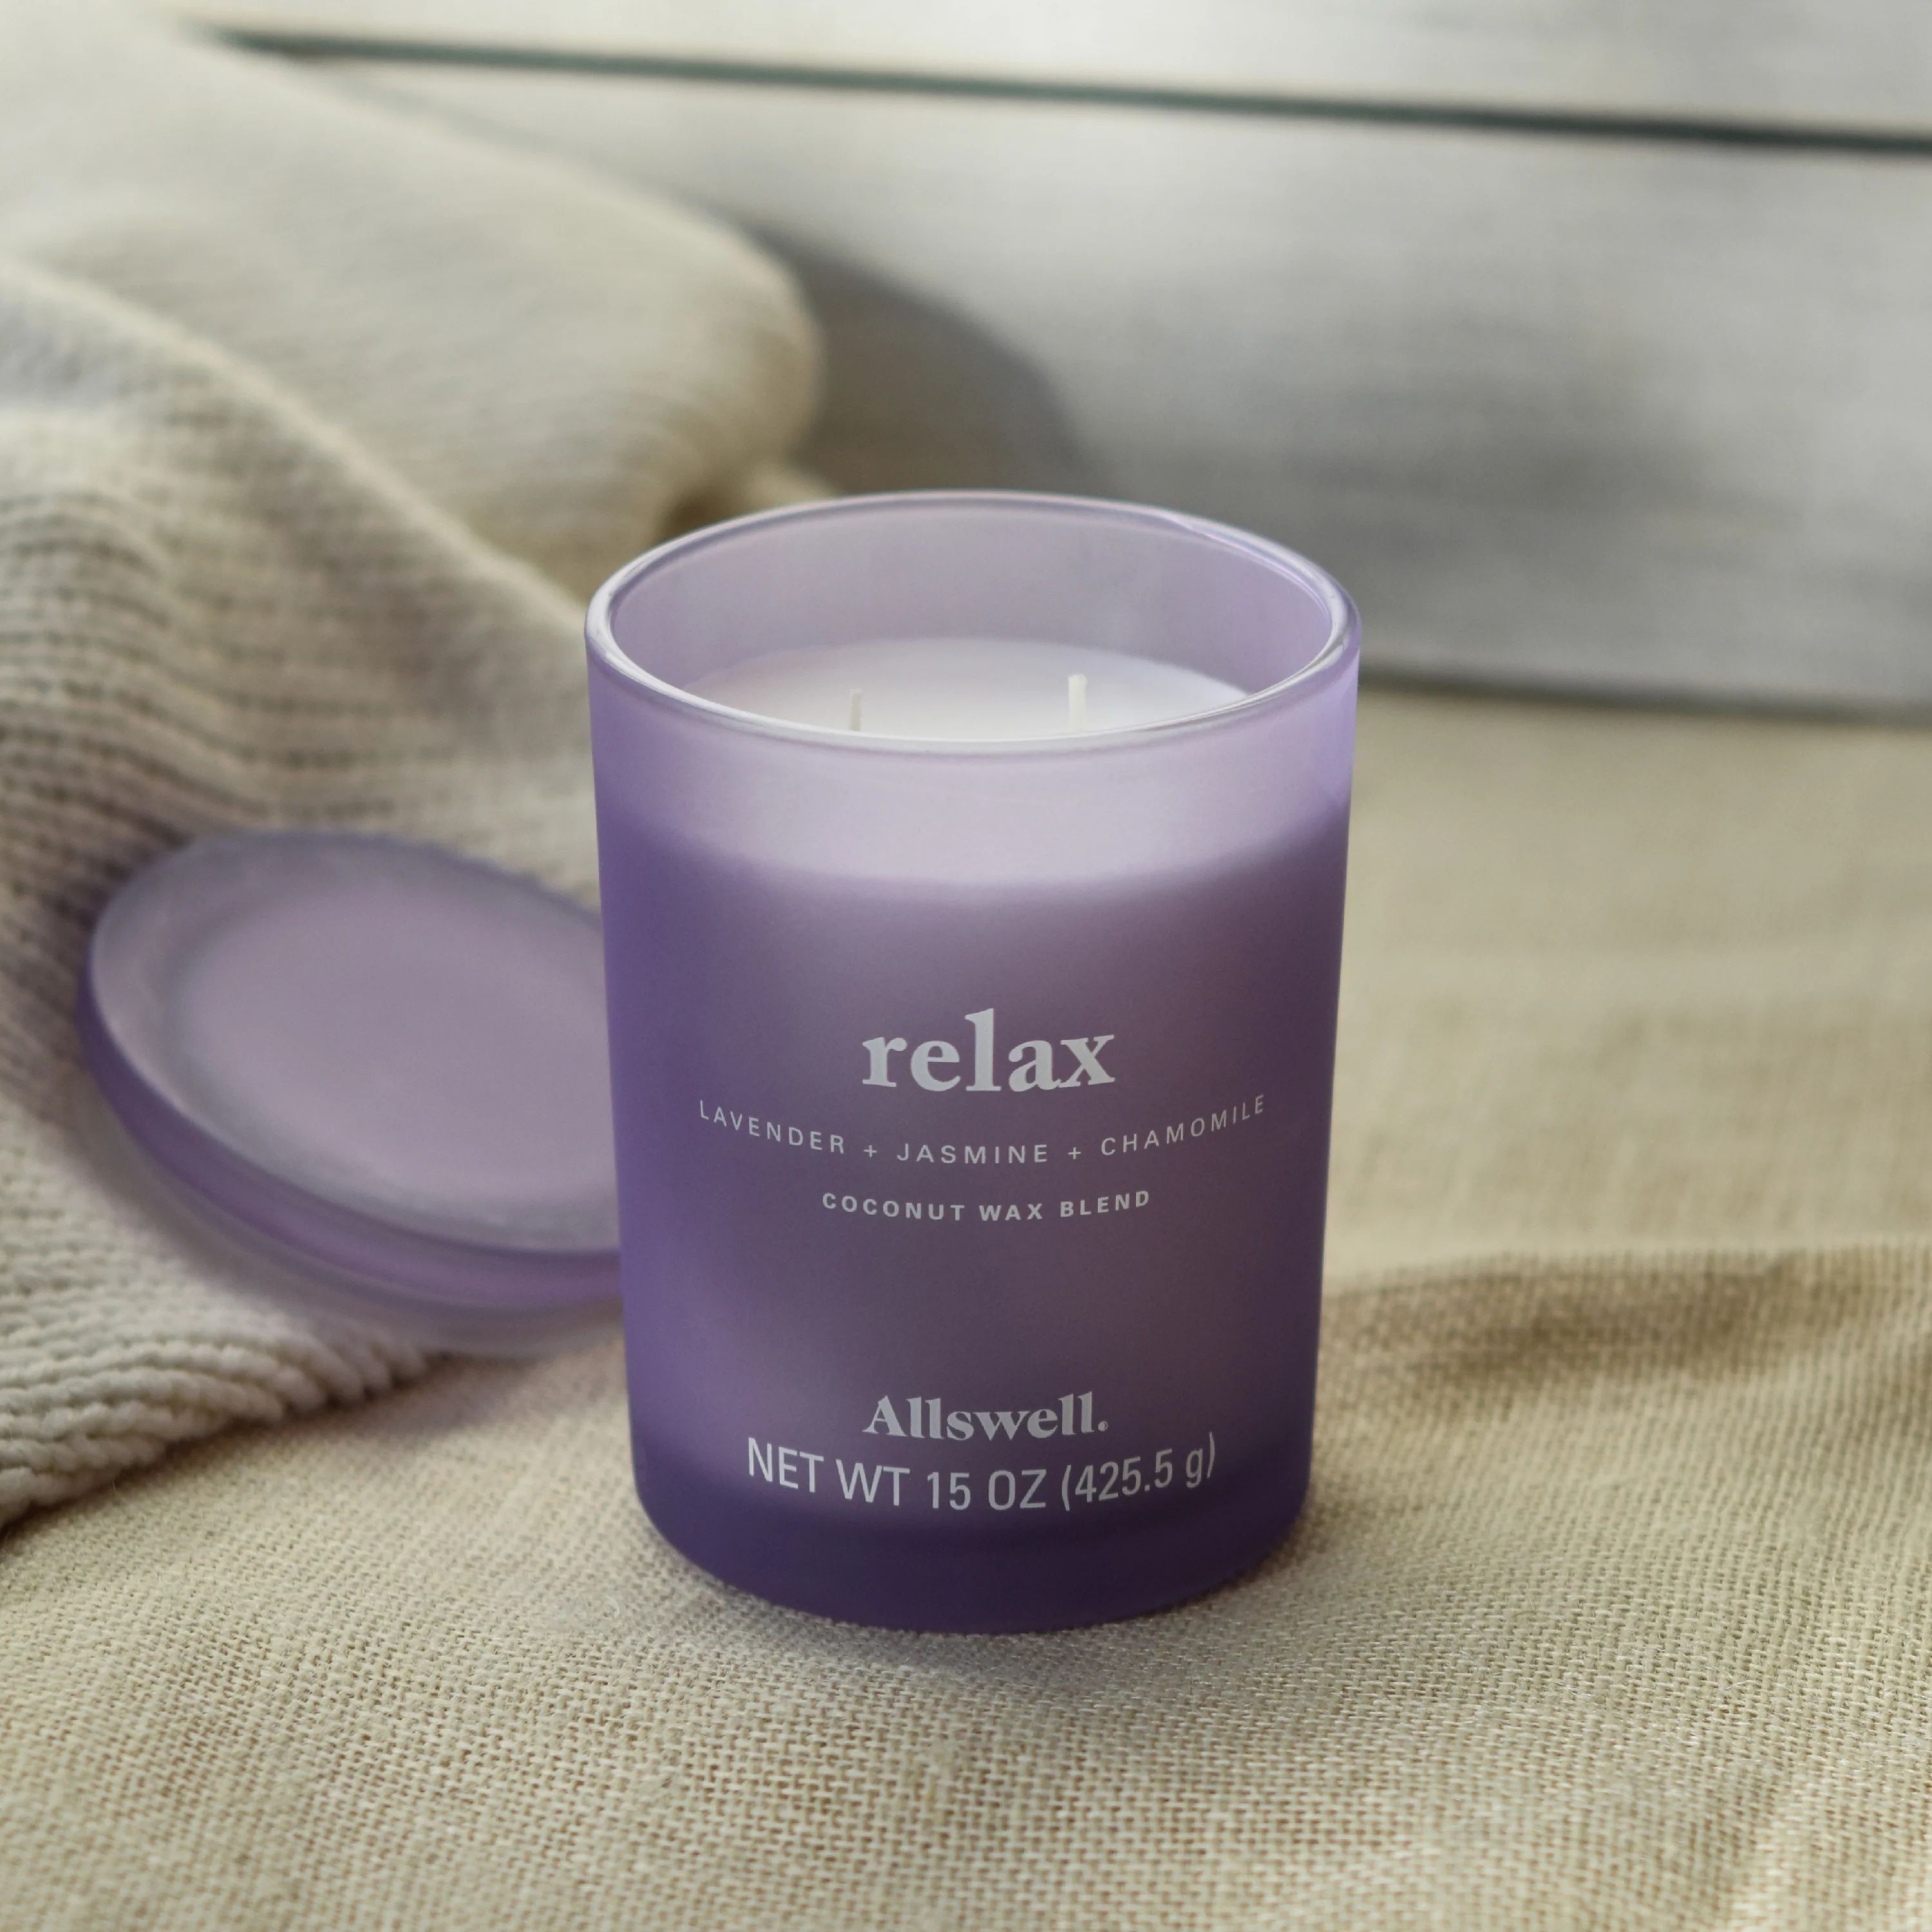 Relax (Lavender + Jasmine + Chamomile) 2-Wick Spa Candle | Allswell Home